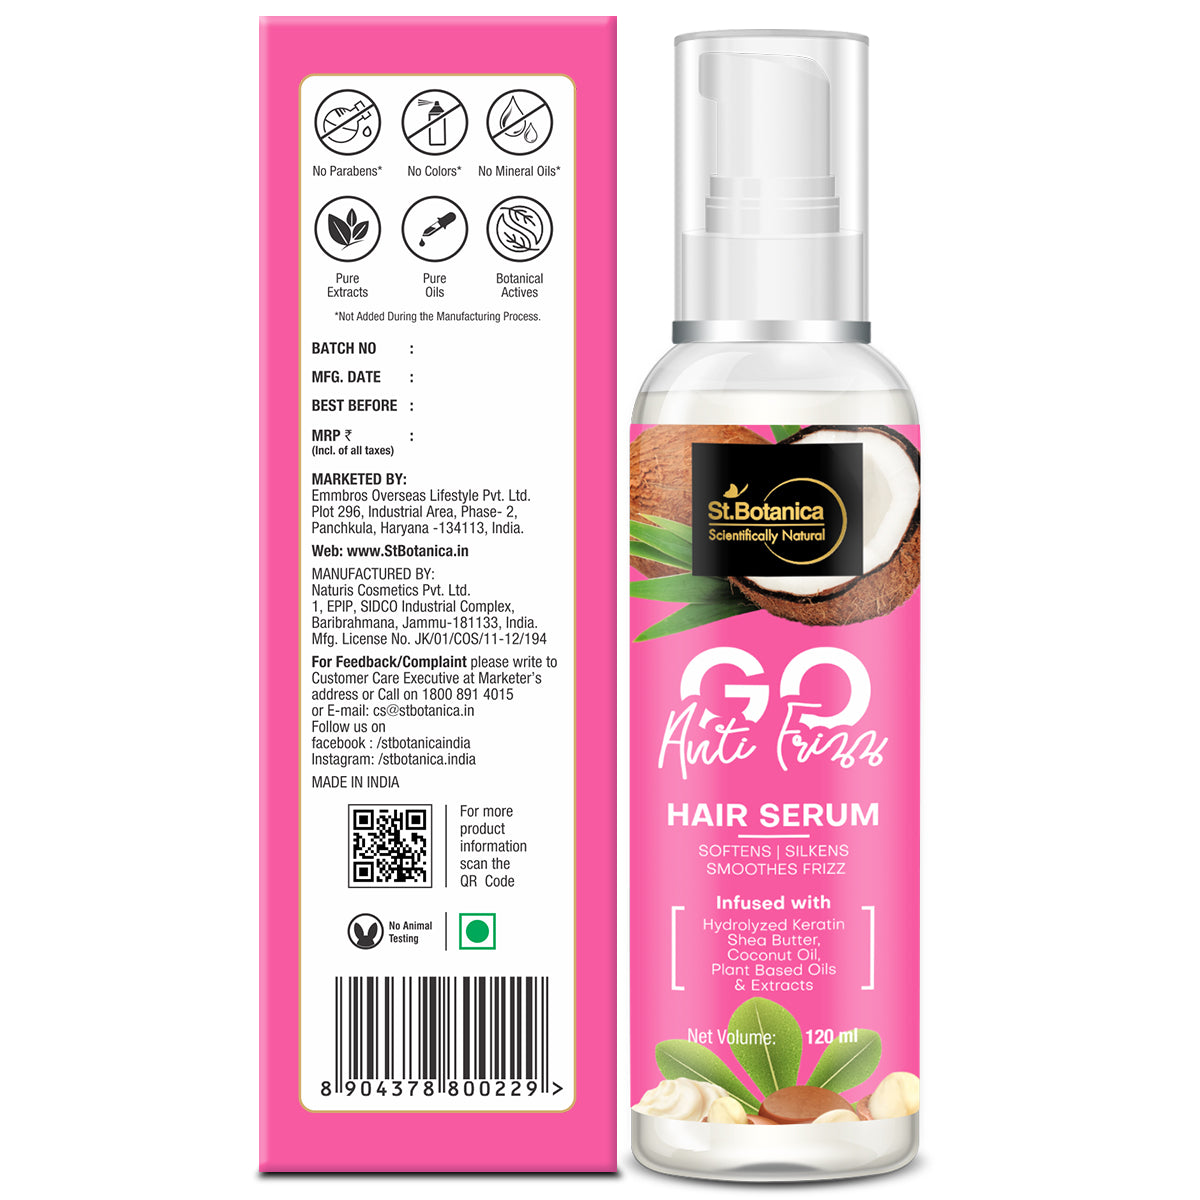 St.Botanica GO Anti Frizz Hair Serum - Infused With Hydrolyzed Keratin, Shea Butter, Coconut Oil For Frizz-free, Smooth & Lustrous Hair, 120ml